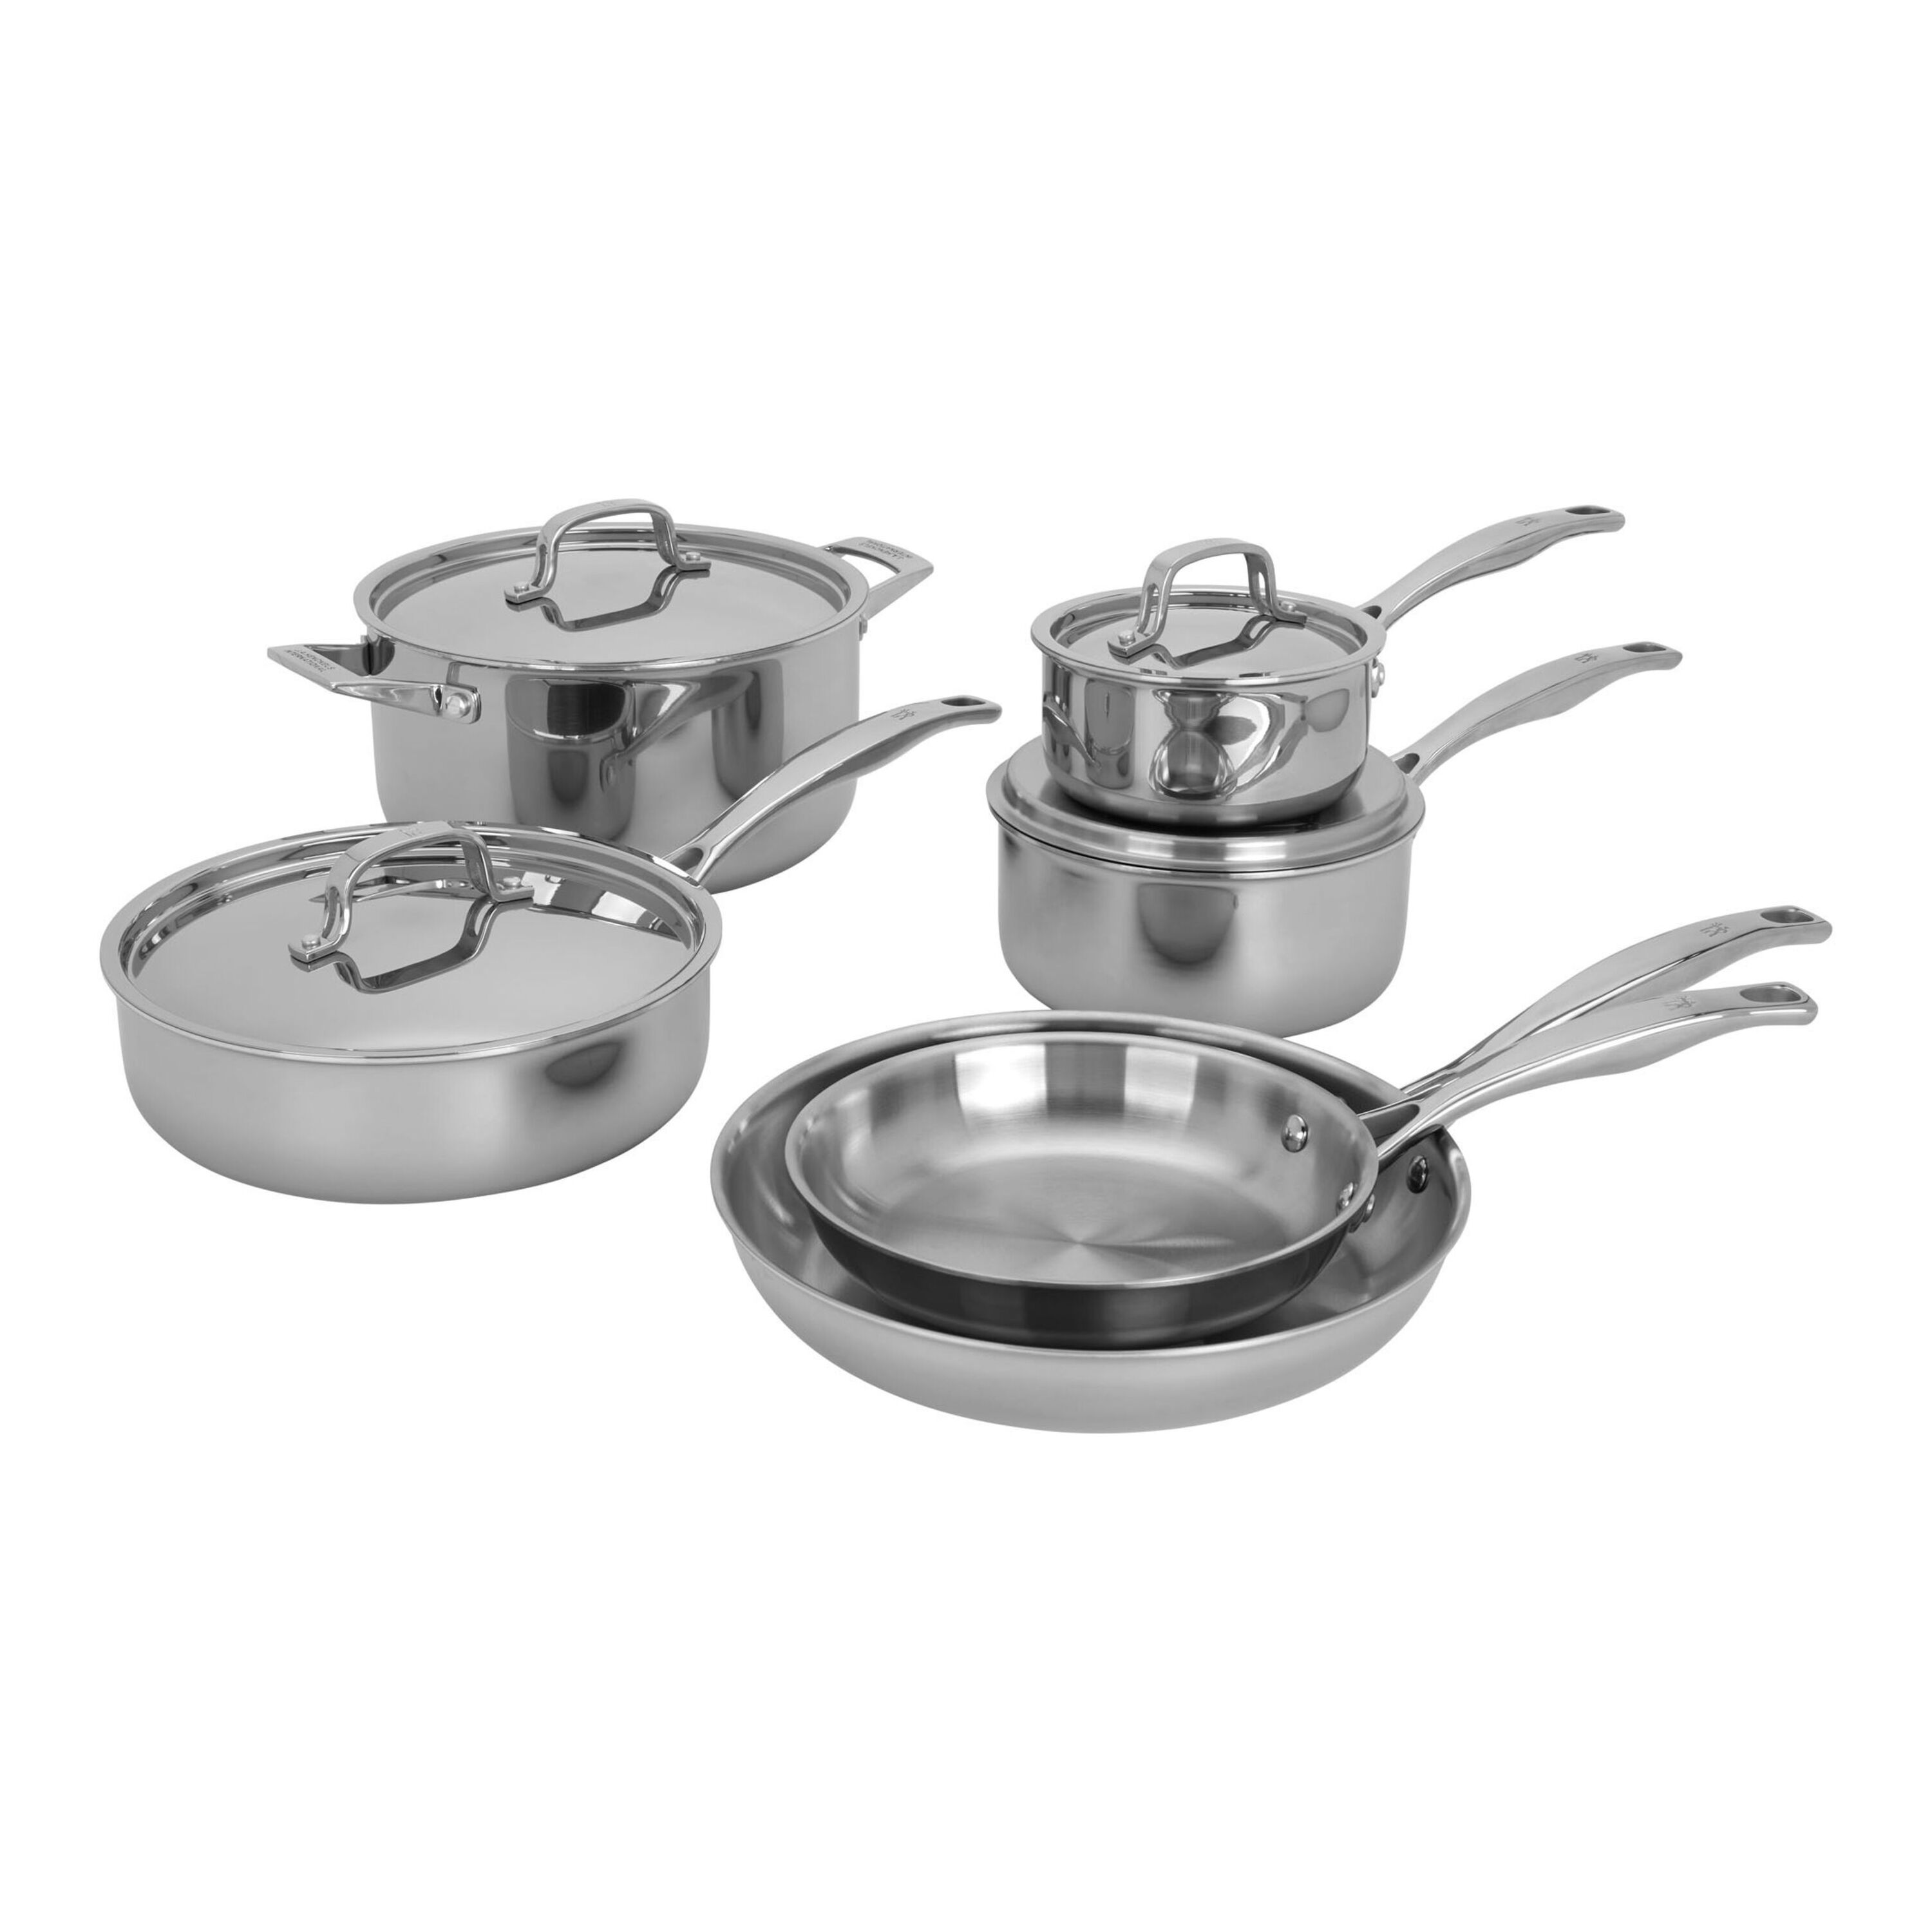 Cooking solutions with Triply Cookware